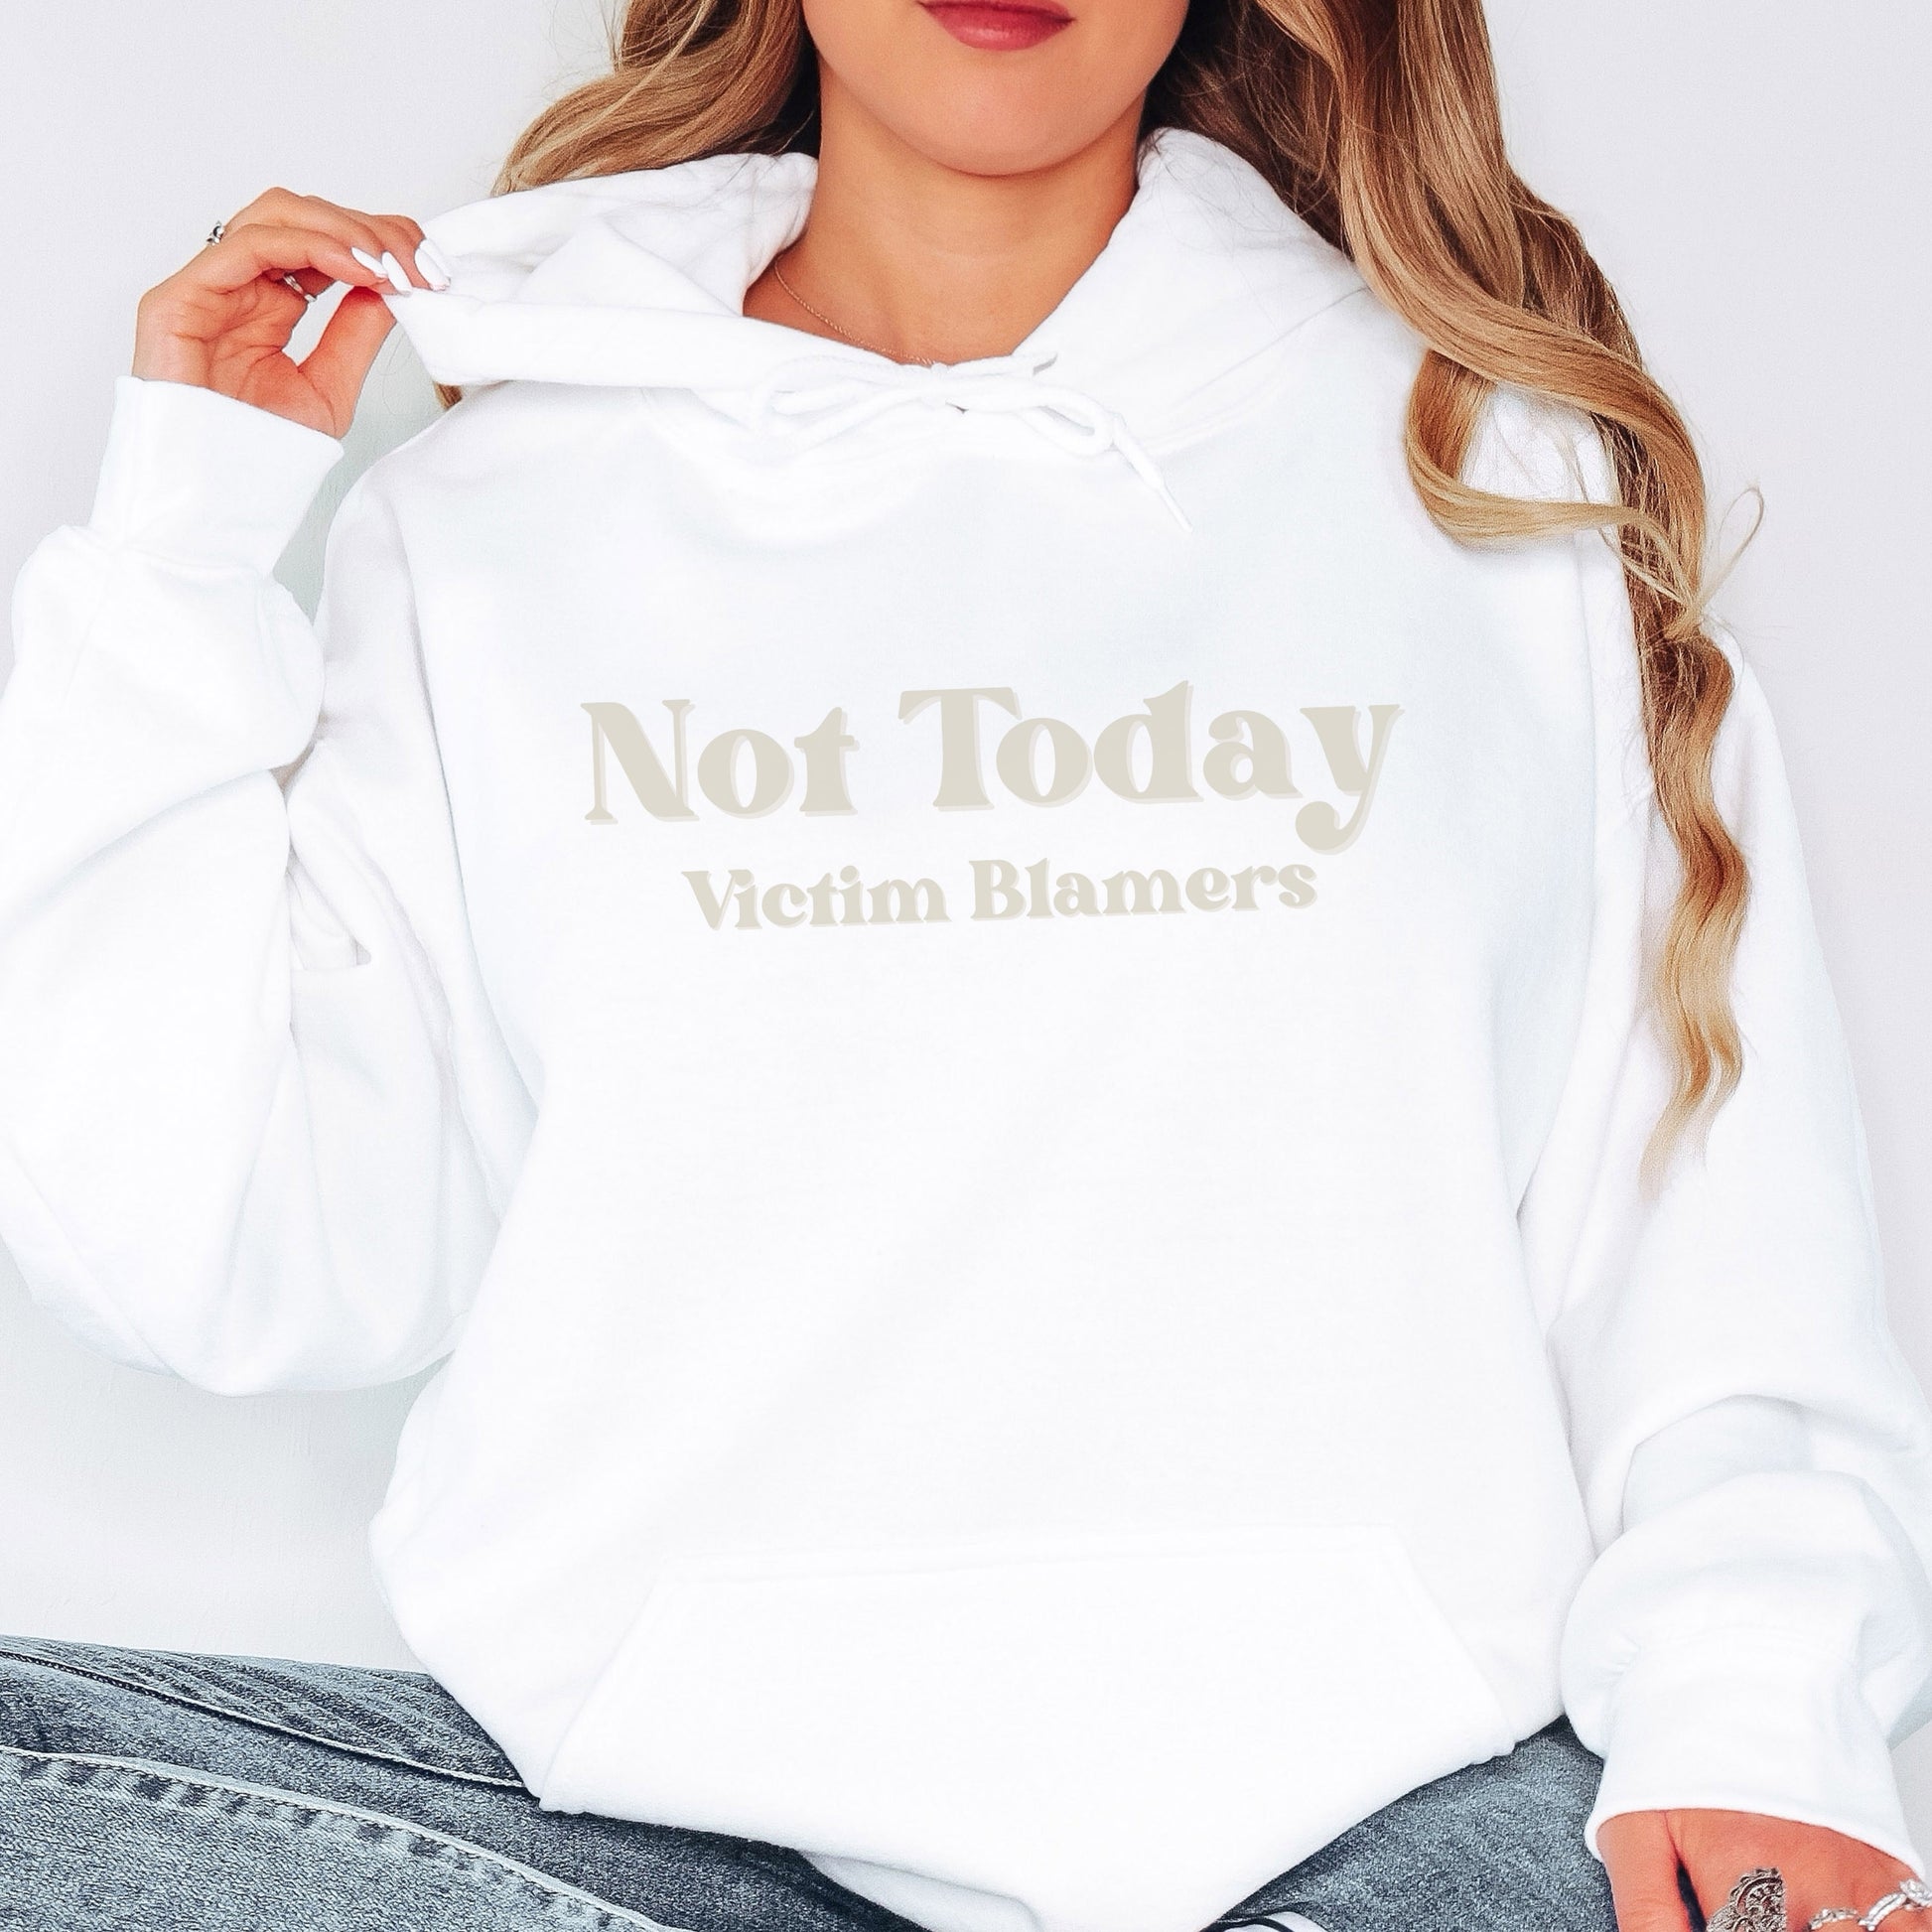 The front of the hooded sweatshirt proudly displays the phrase Not Today Victim Blamers in a bold and eye catching font. This message serves as a reminder that we reject victim blaming and support those who have faced injustice.